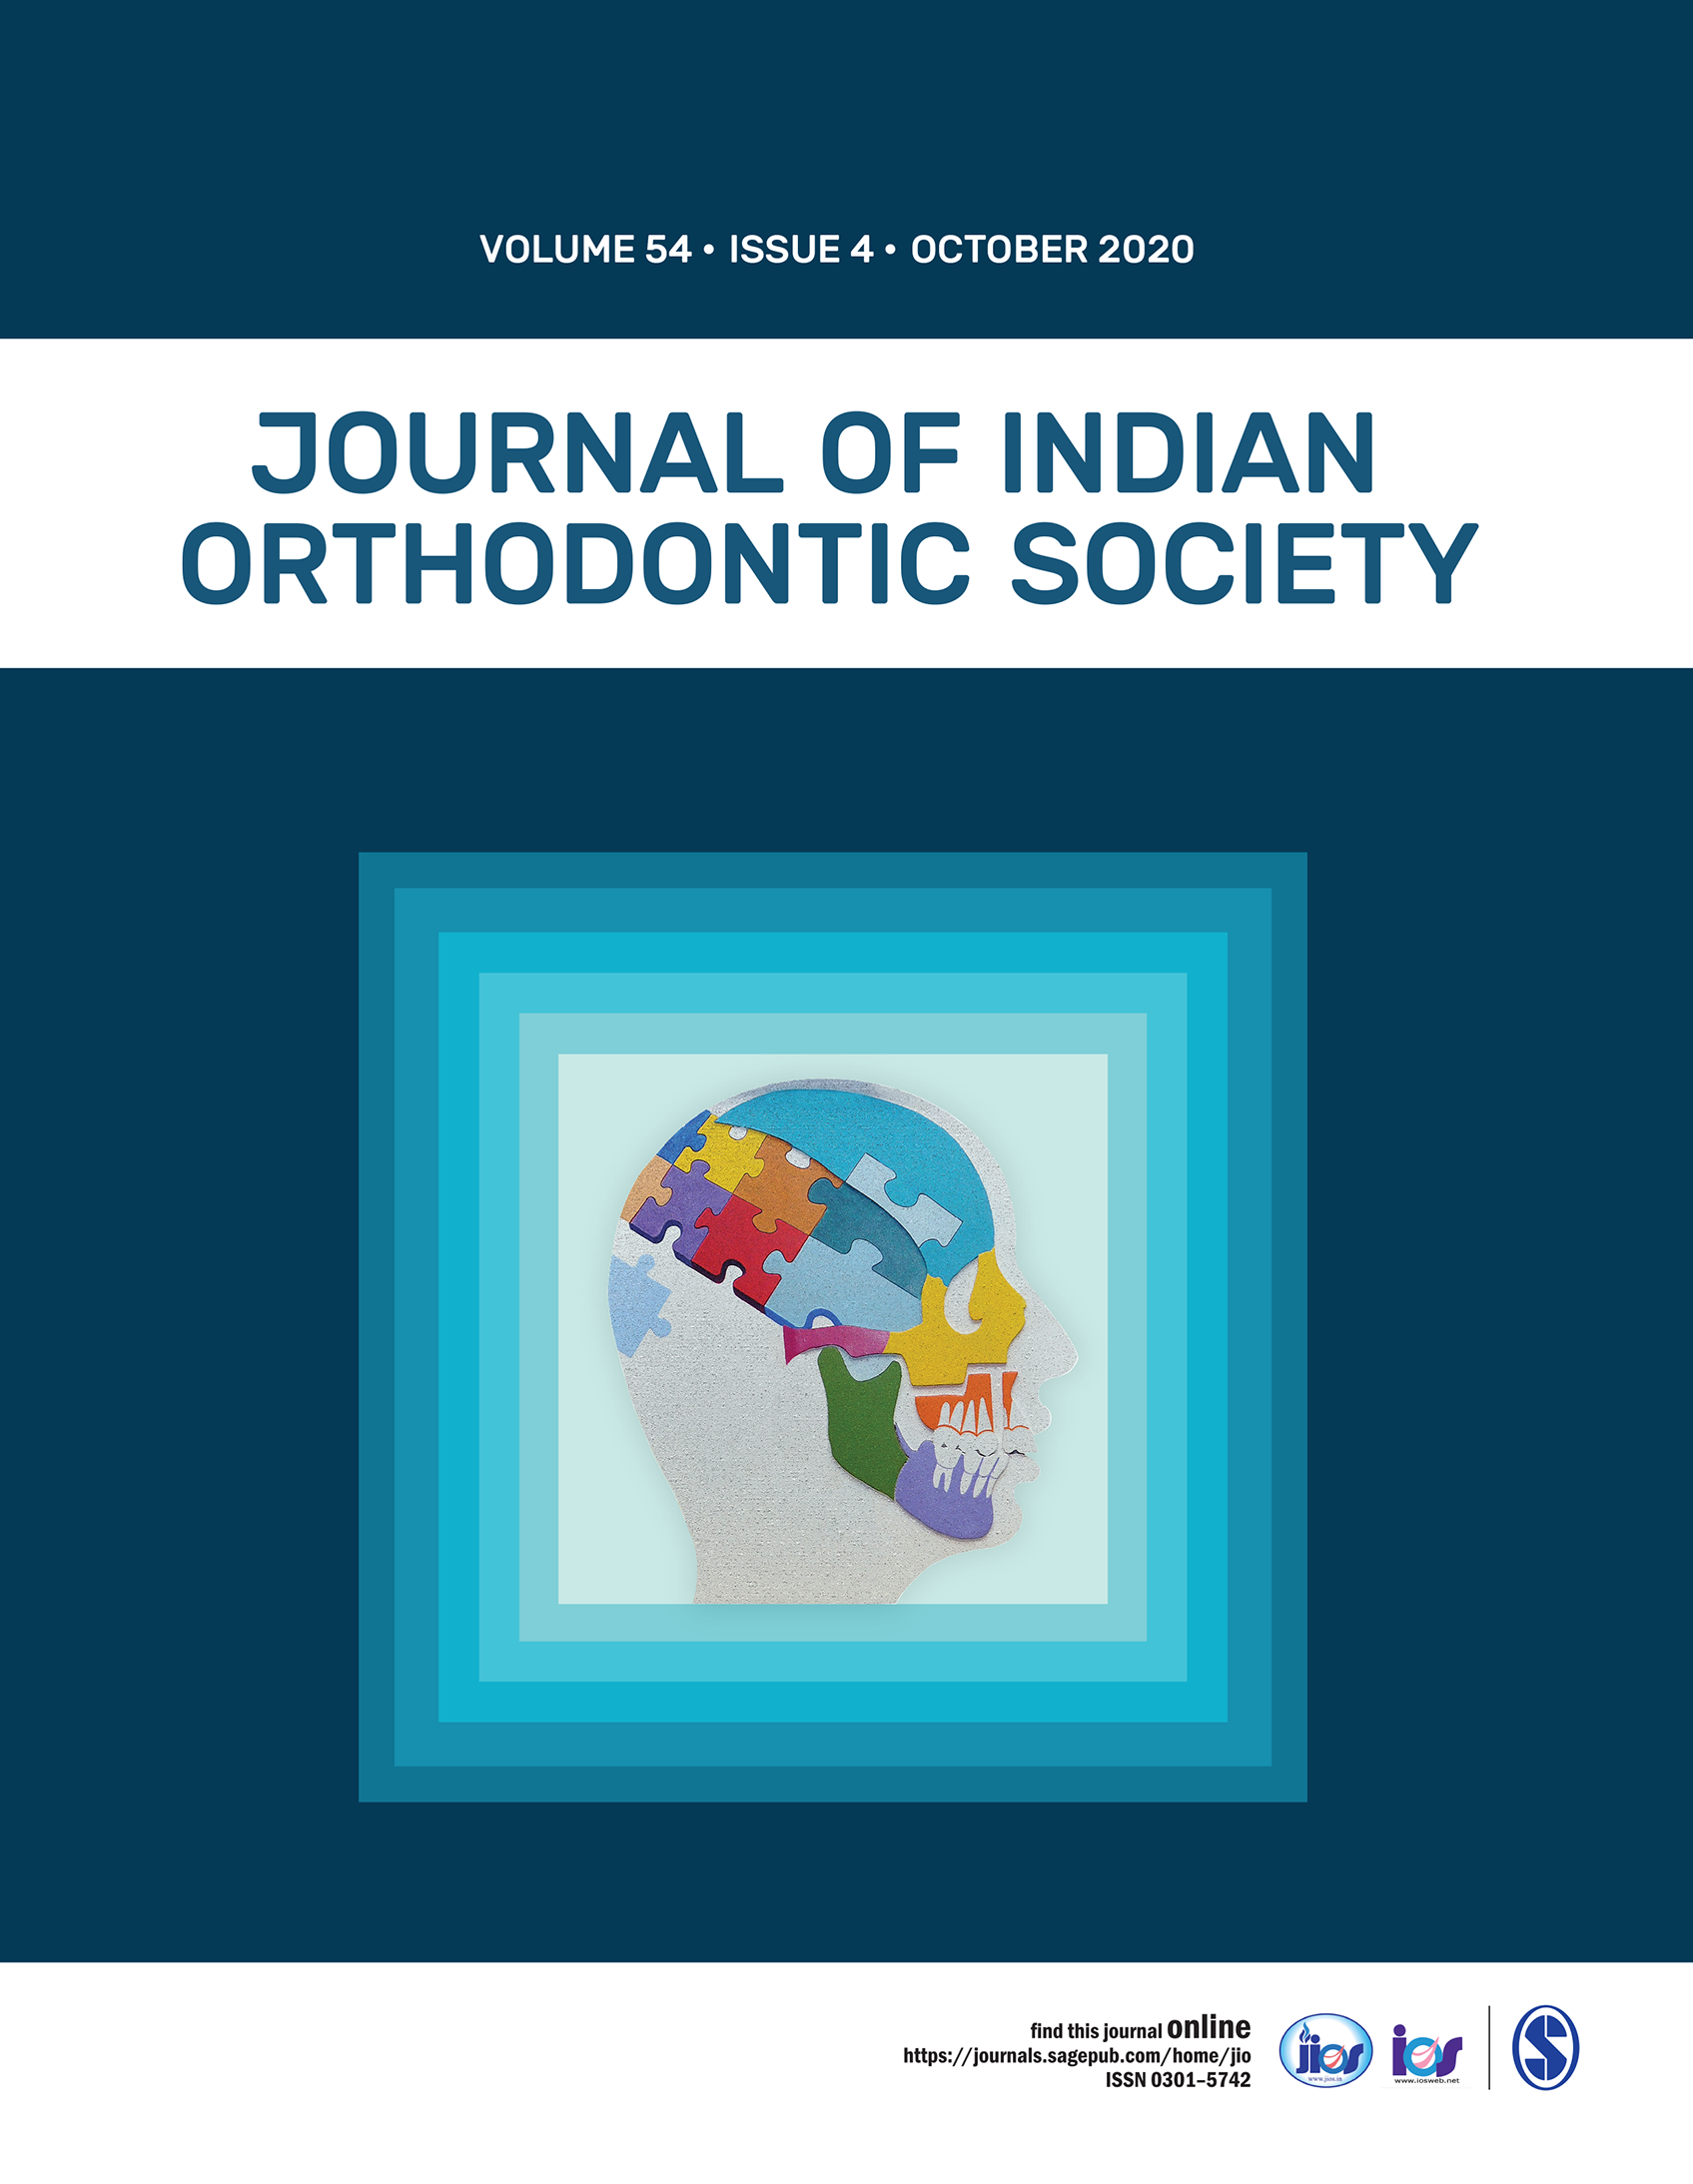 Journal of Indian Orthodontic Society